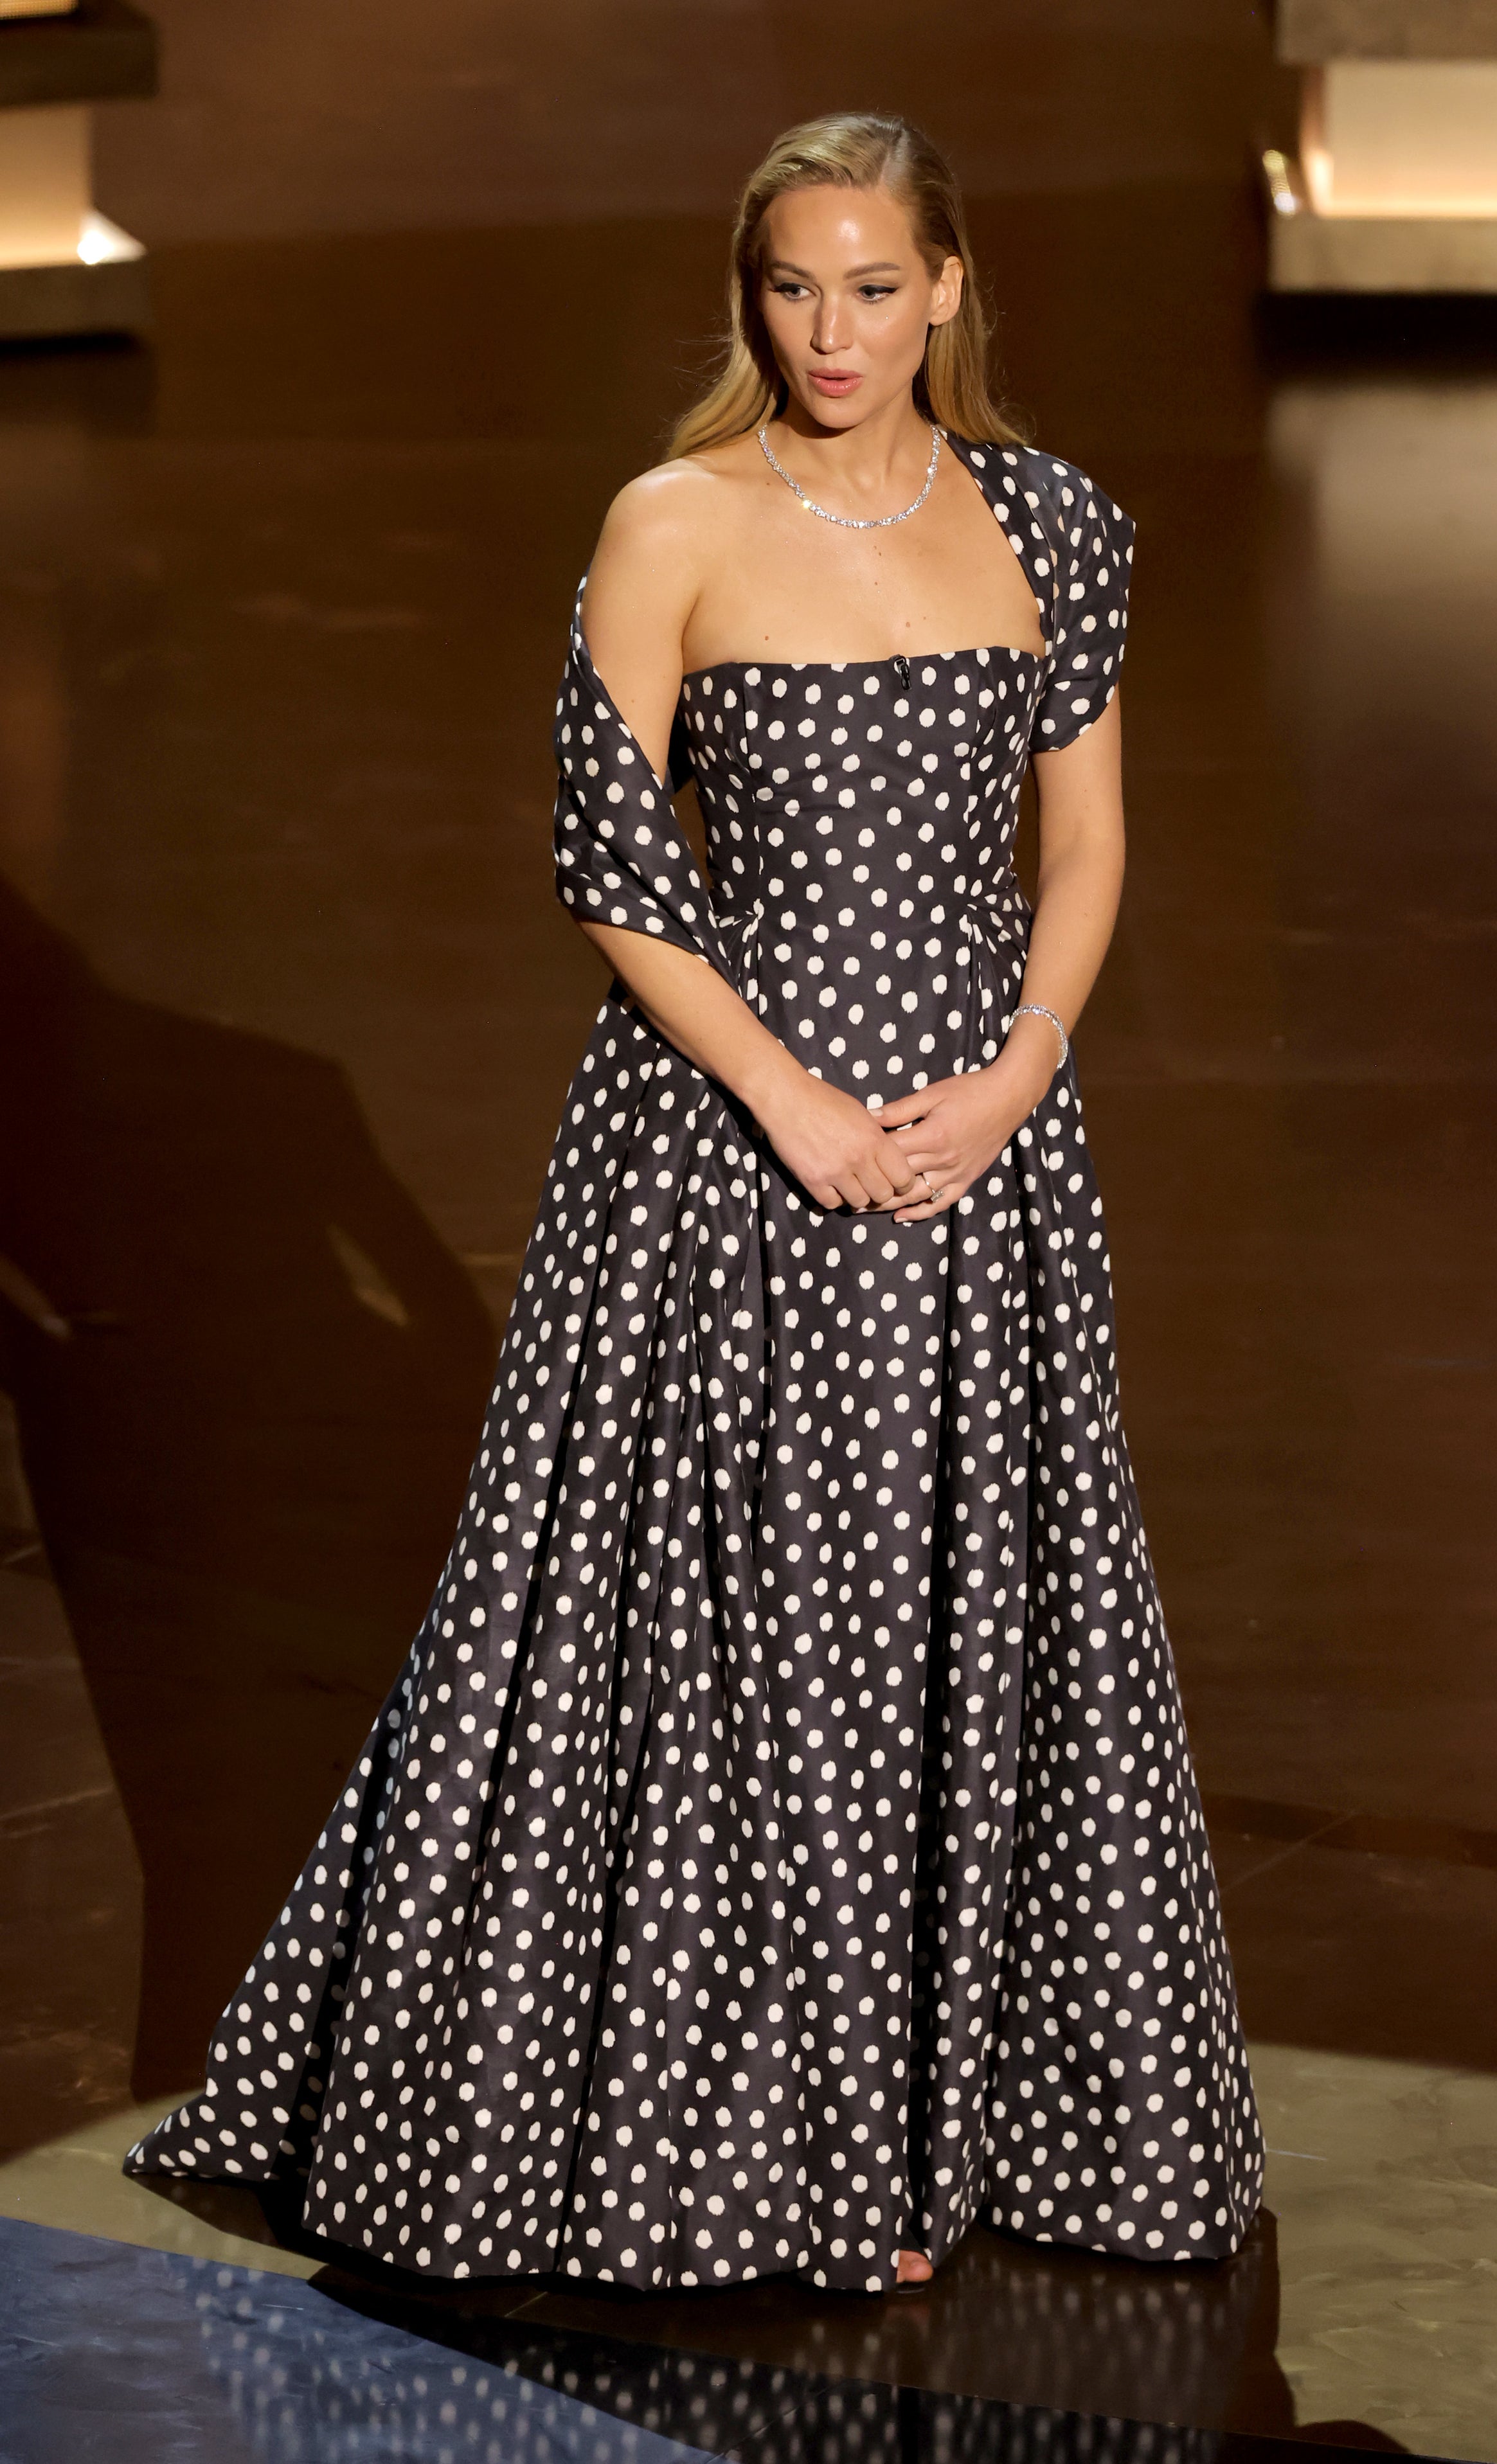 Jennifer in a polka dot off-shoulder gown and pearl necklace standing on stage